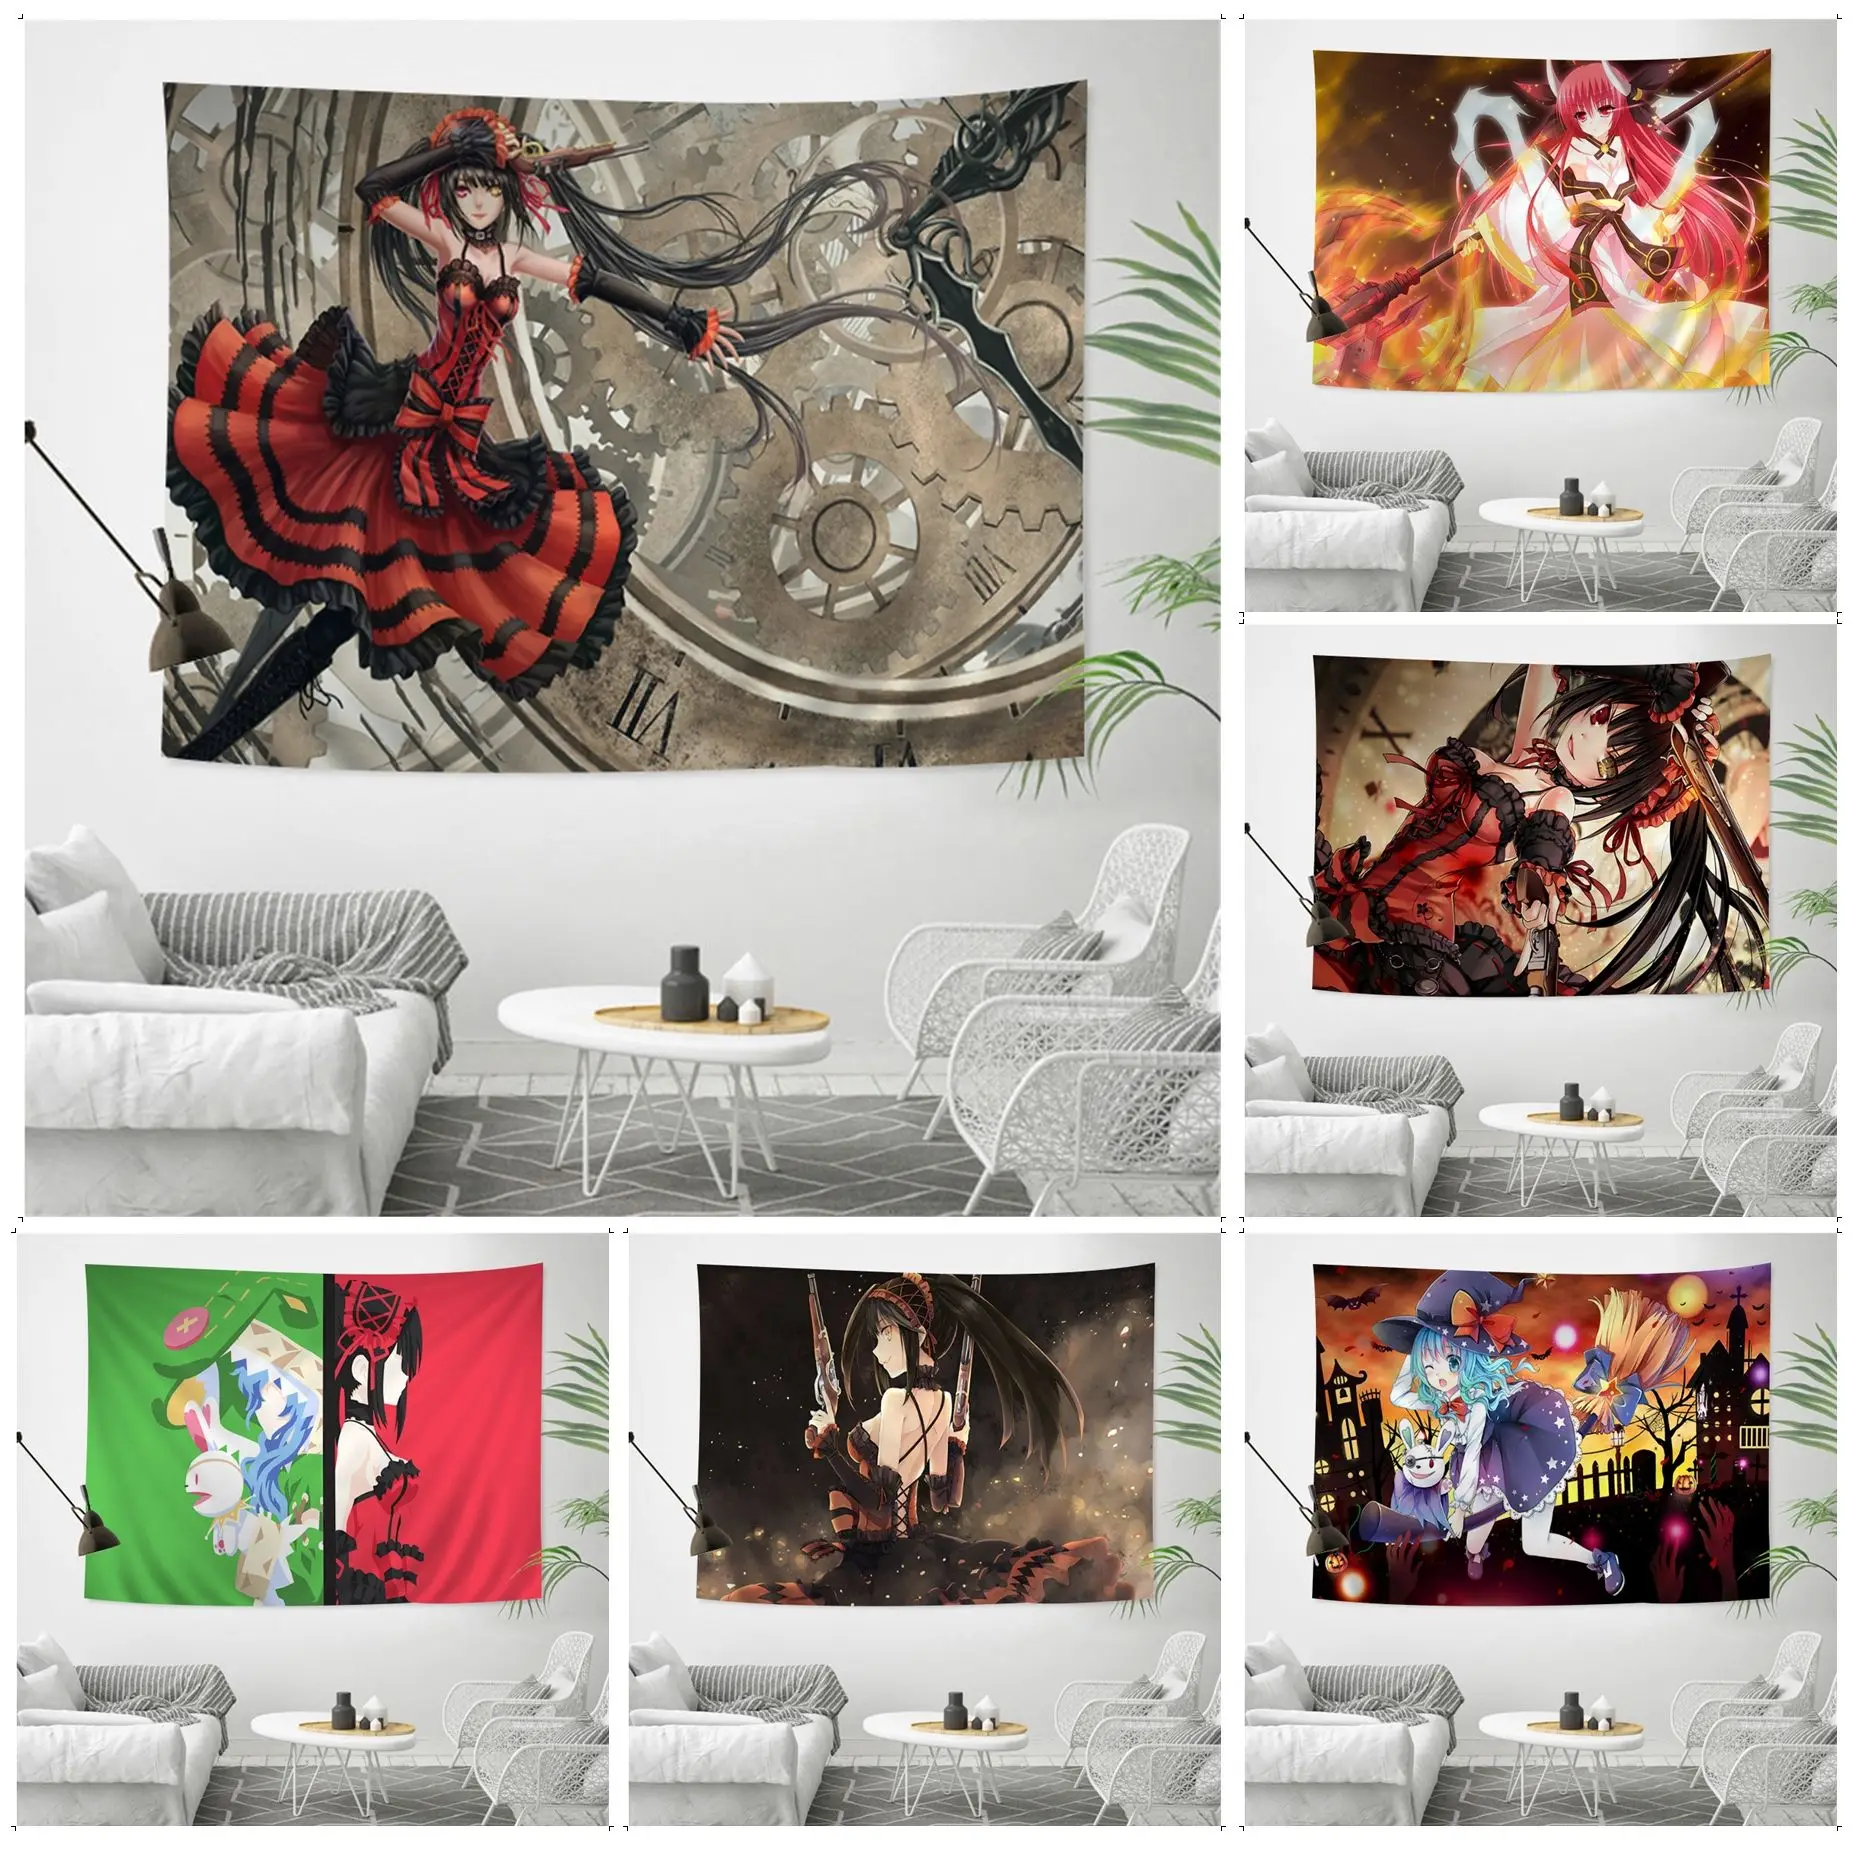 

DATE A LIVE Printed Large Wall Tapestry Hanging Tarot Hippie Wall Rugs Dorm Wall Art Decor